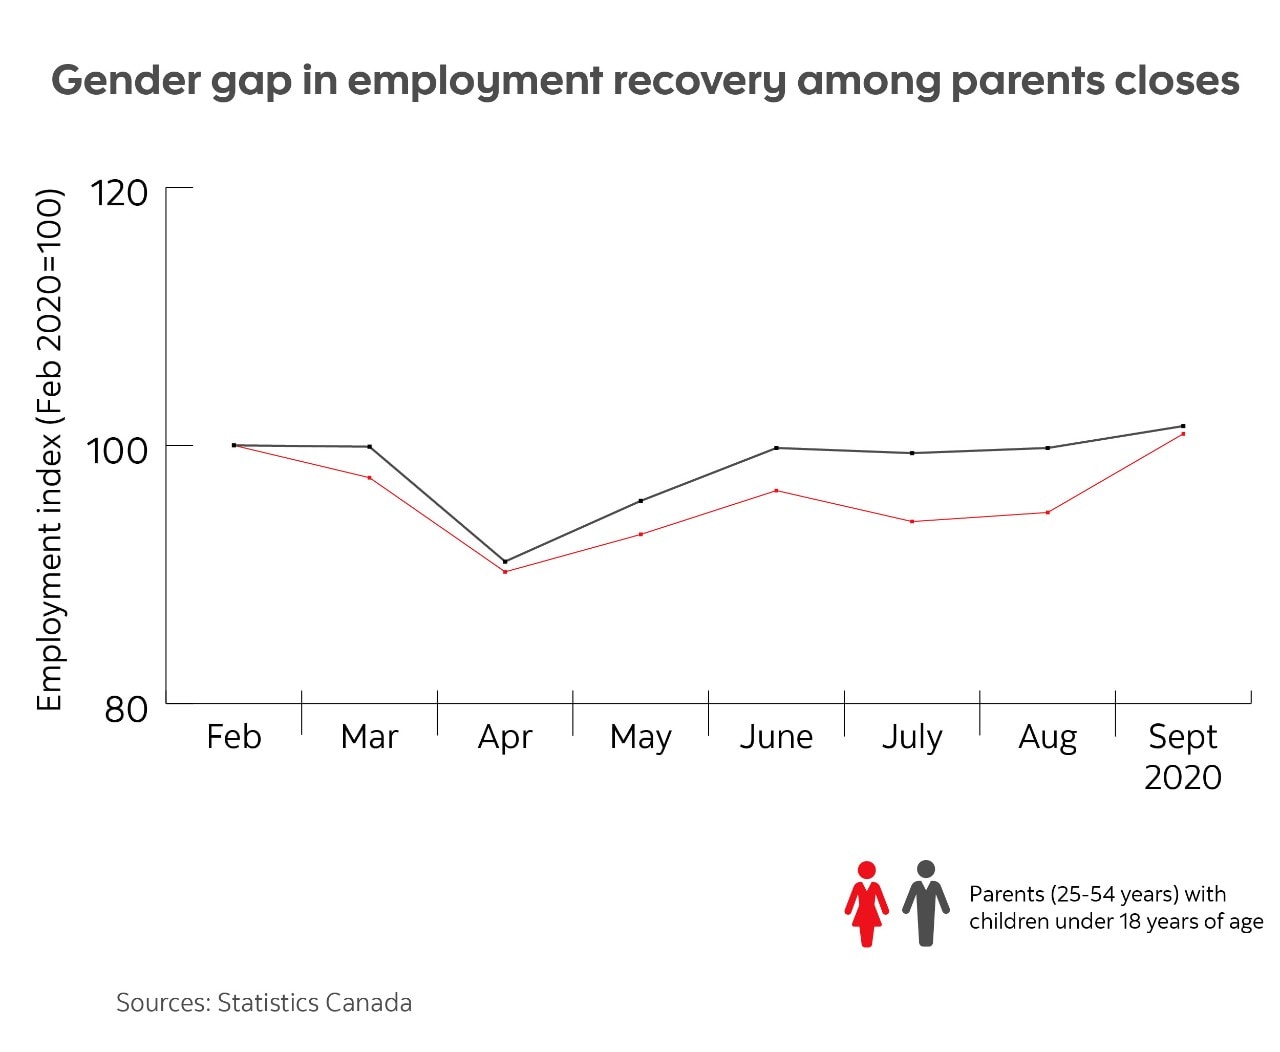 Chart illustrating gender gap in employment recovery